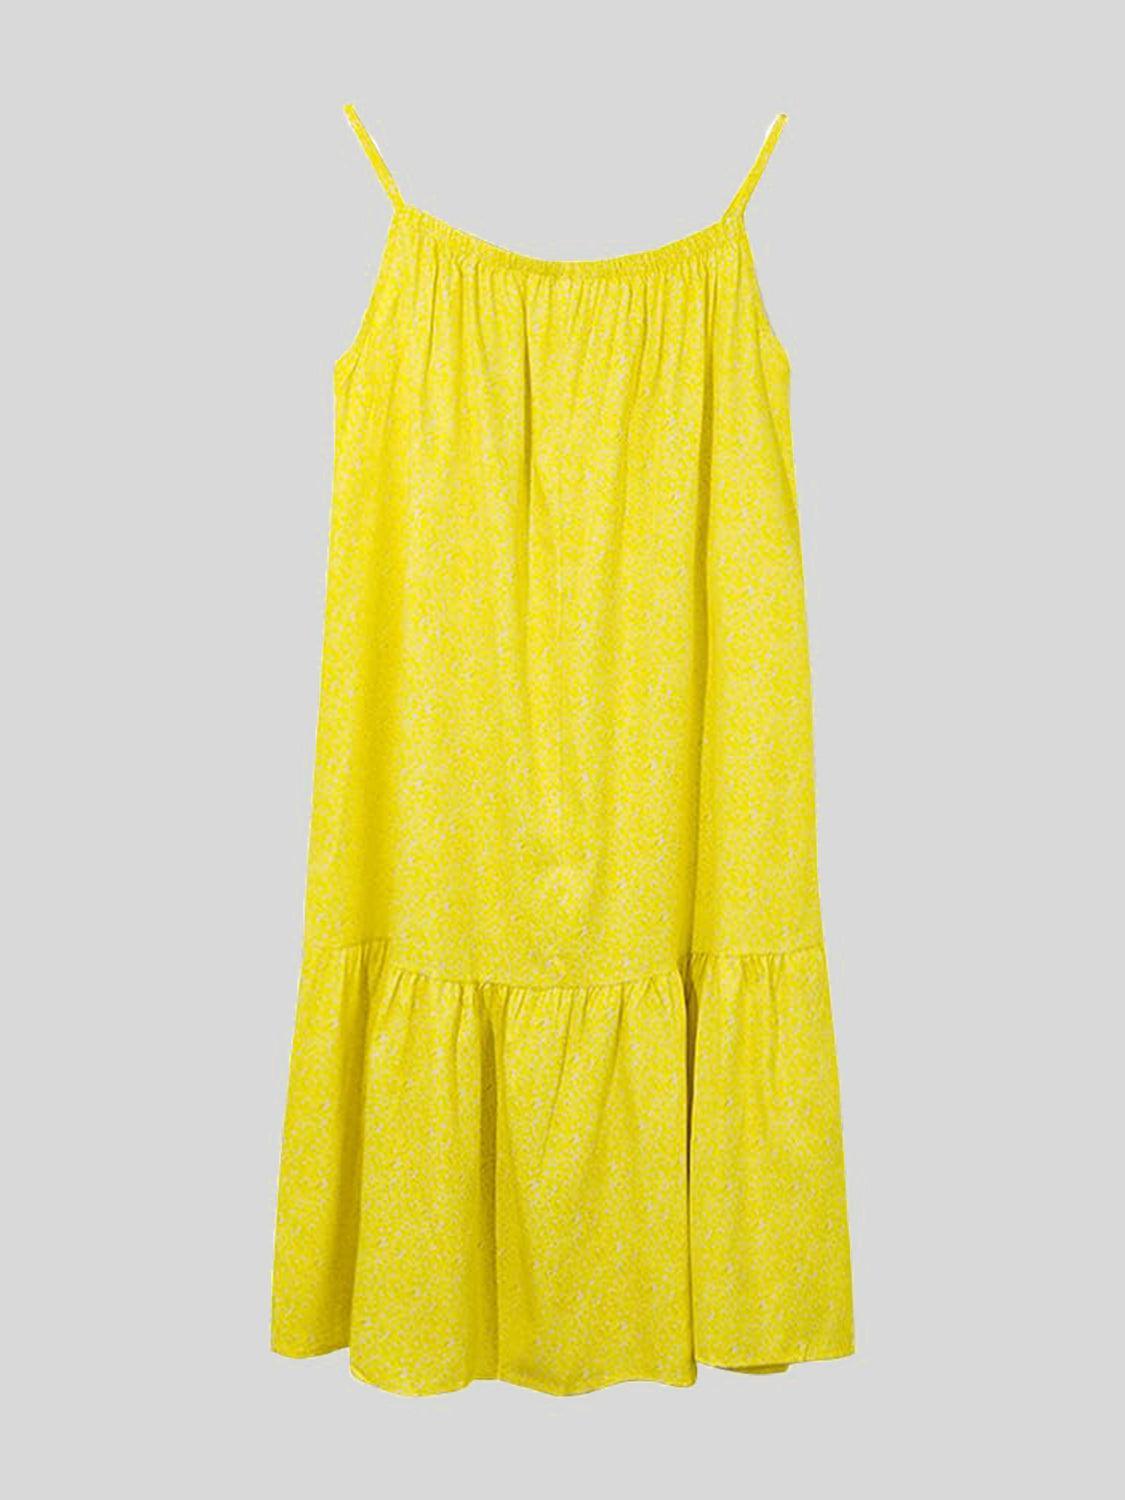 a yellow dress hanging on a hanger